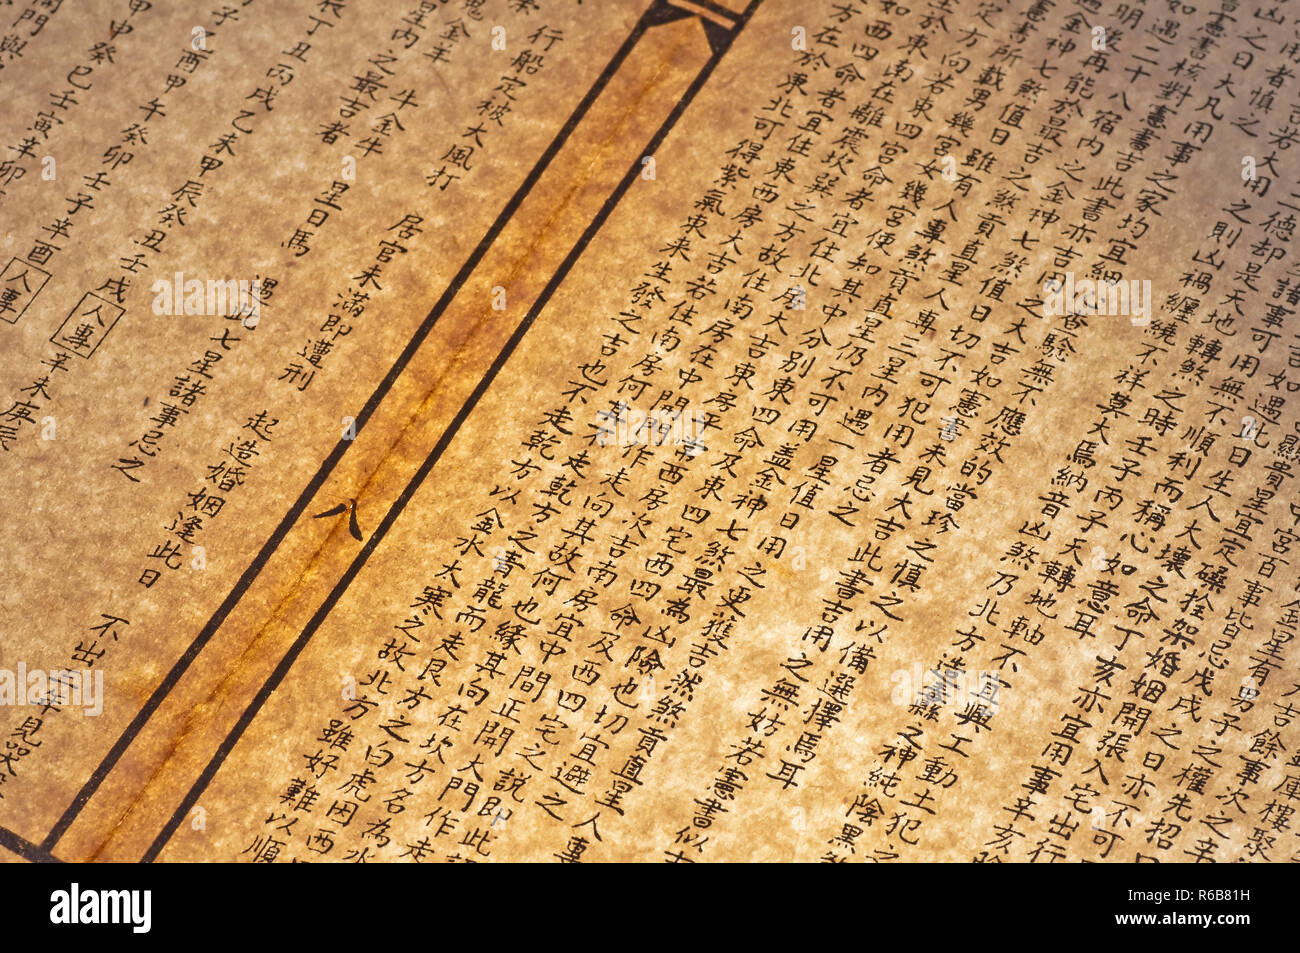 Historic Chinese Text Stock Photo